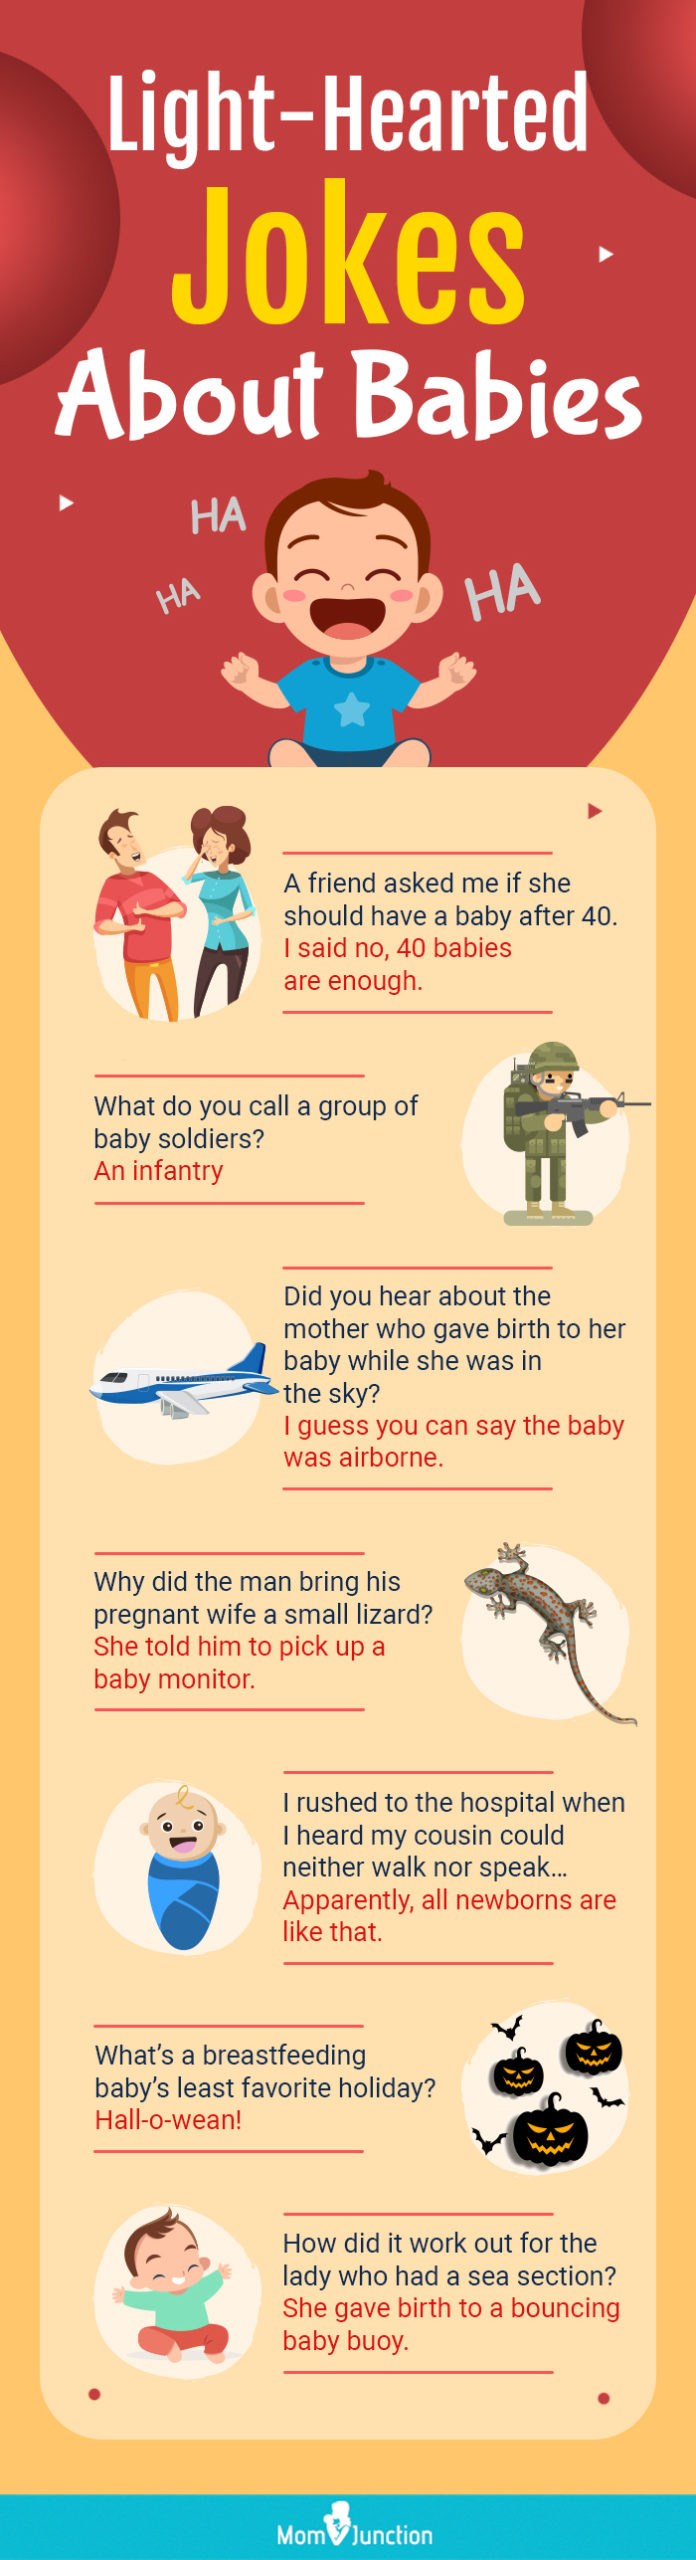 jokes about babies [infographic]